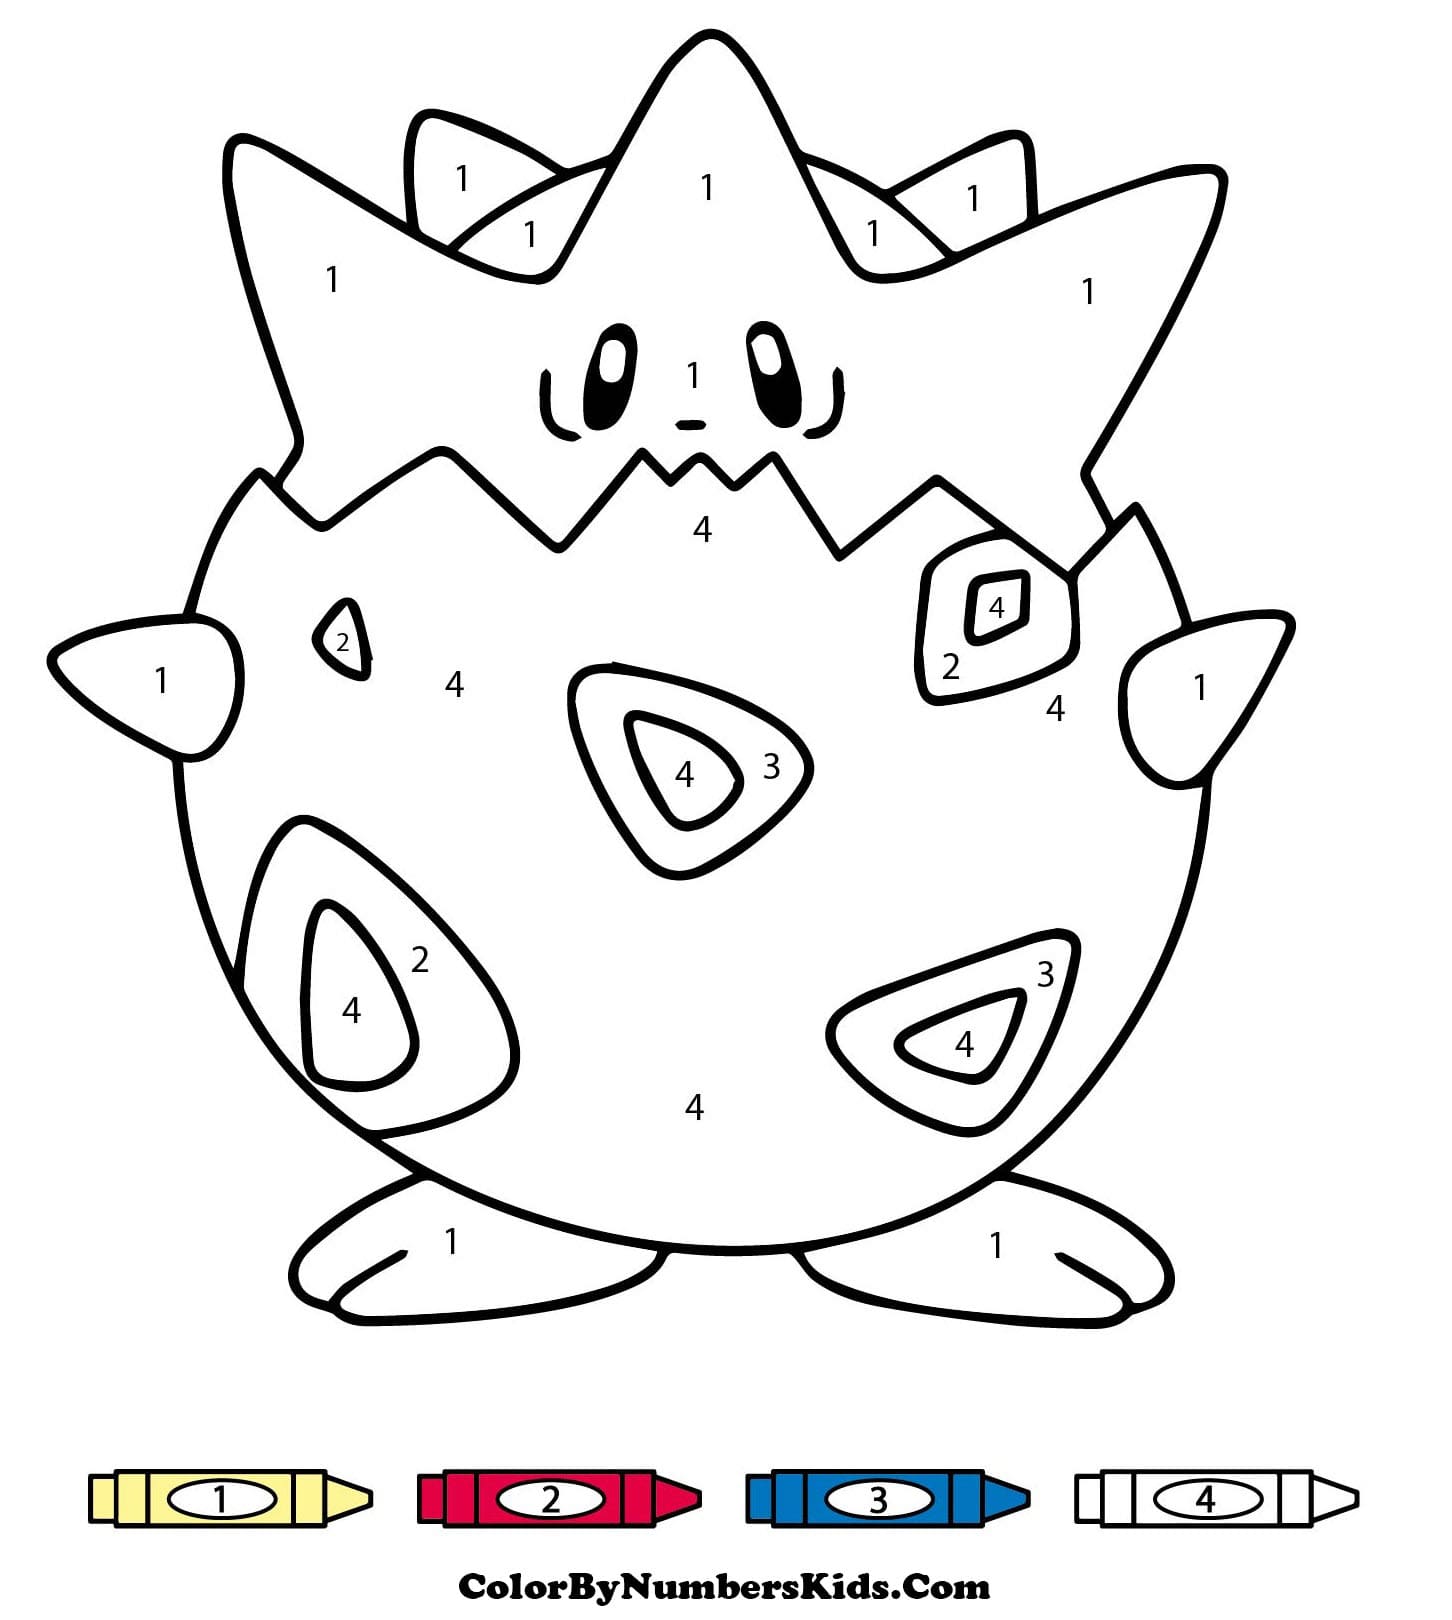 Togepi Pokemon Color By Numbers